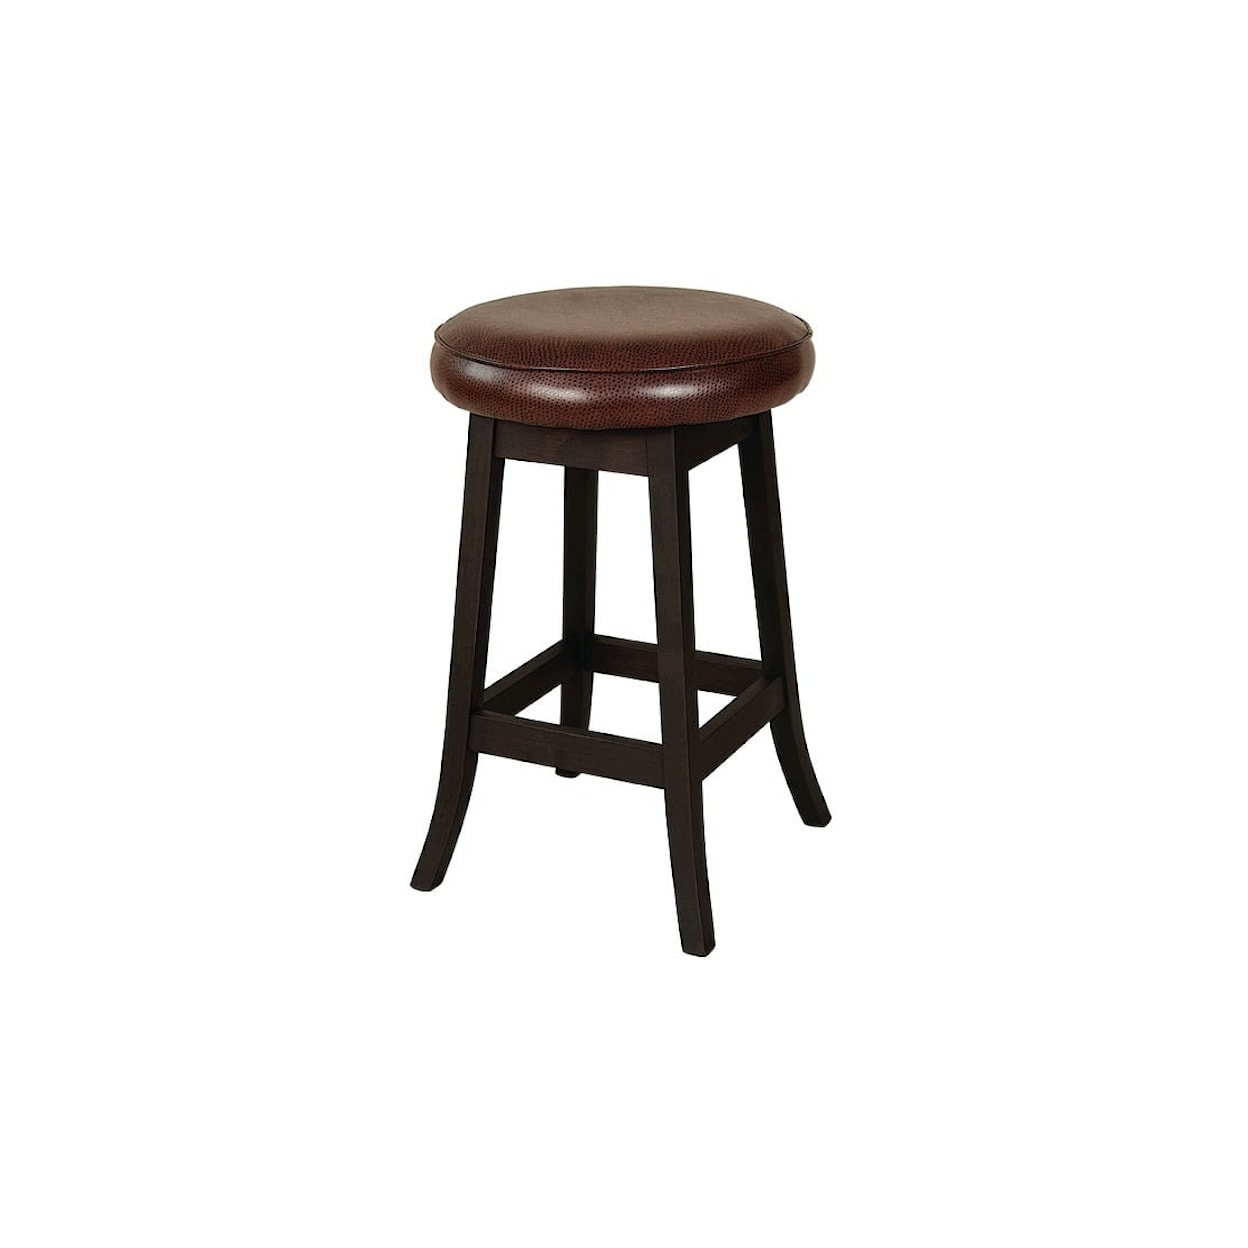 Dover Road Bronson Bar Stool with Leather